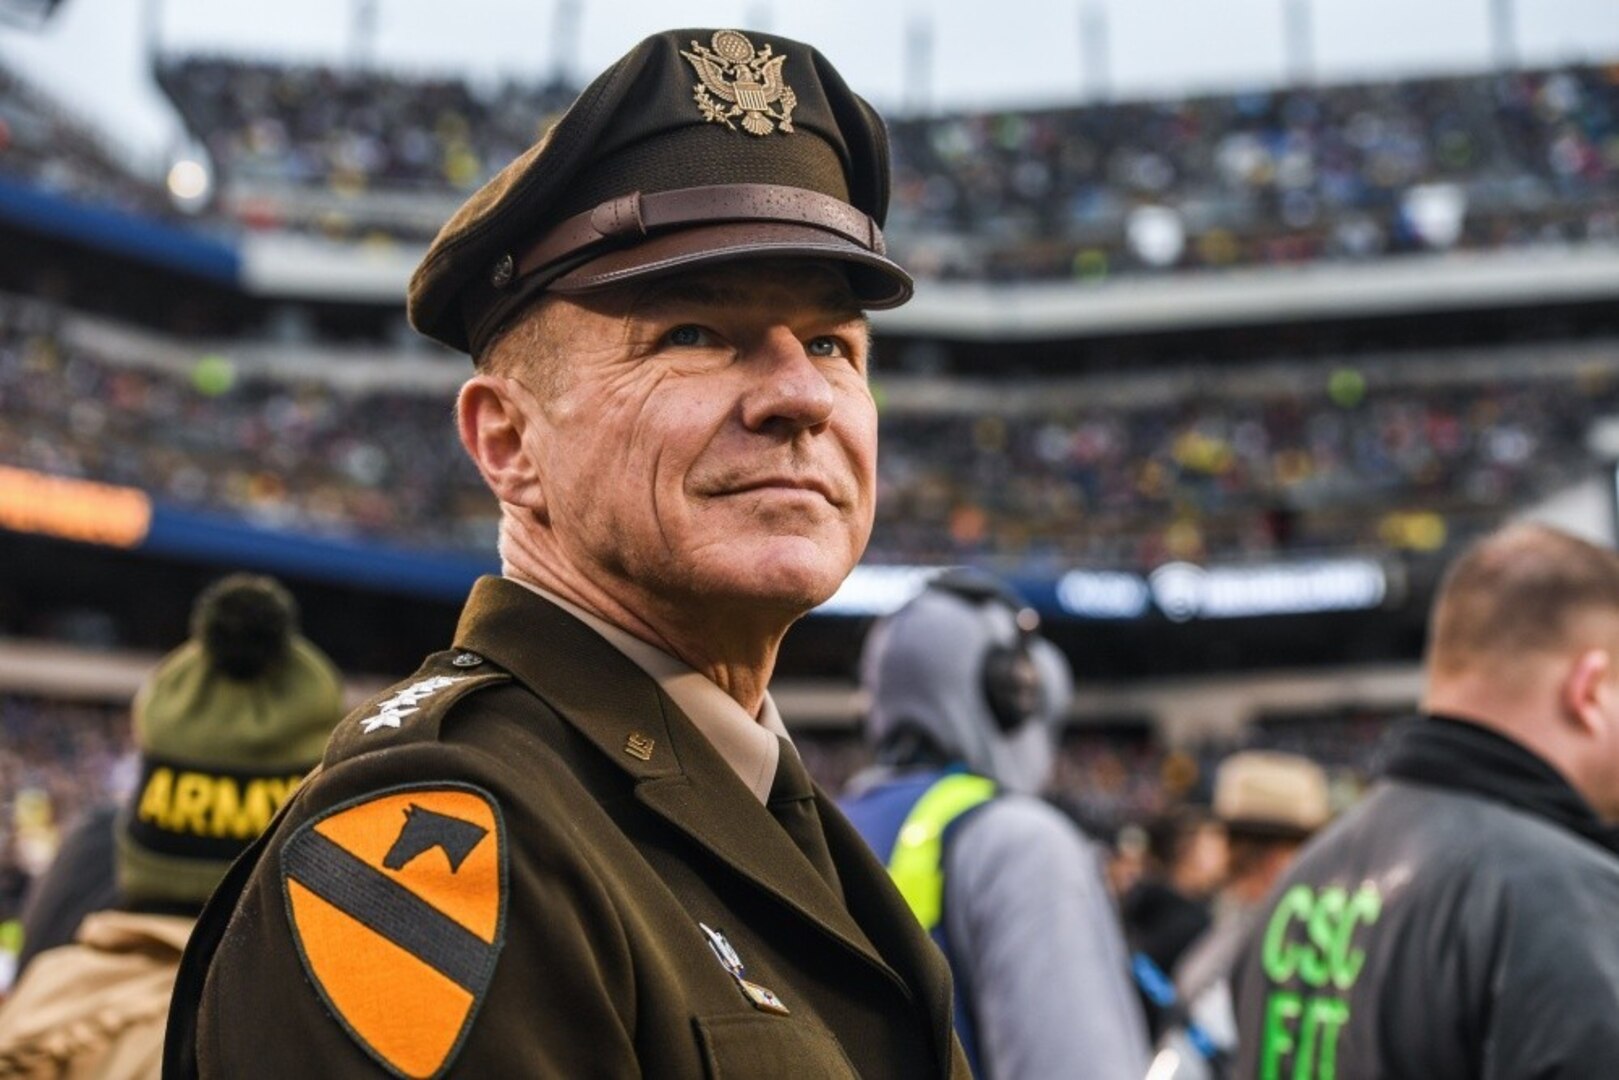 Chief of Staff of the Army Gen. James C. McConville attends the 2019 Army-Navy game in Philadelphia, Pennsylvania, Dec. 14, 2019.